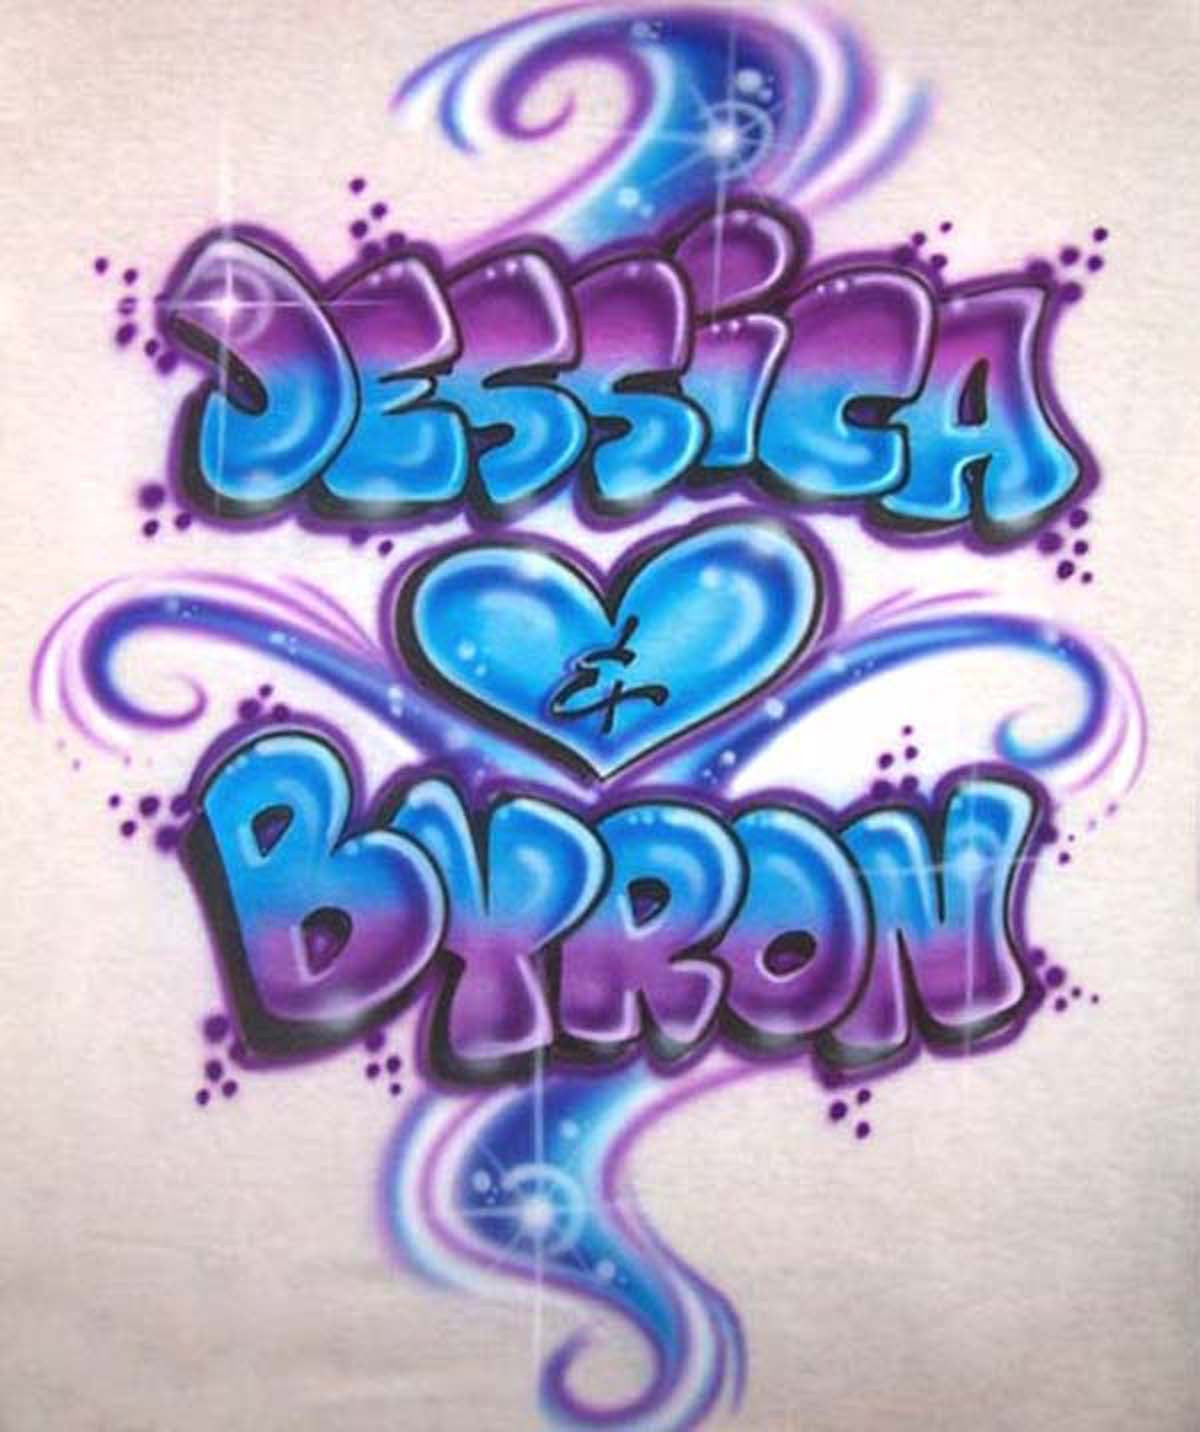 Graffiti style names with heart & color swirl T-shirt or sweatshirt